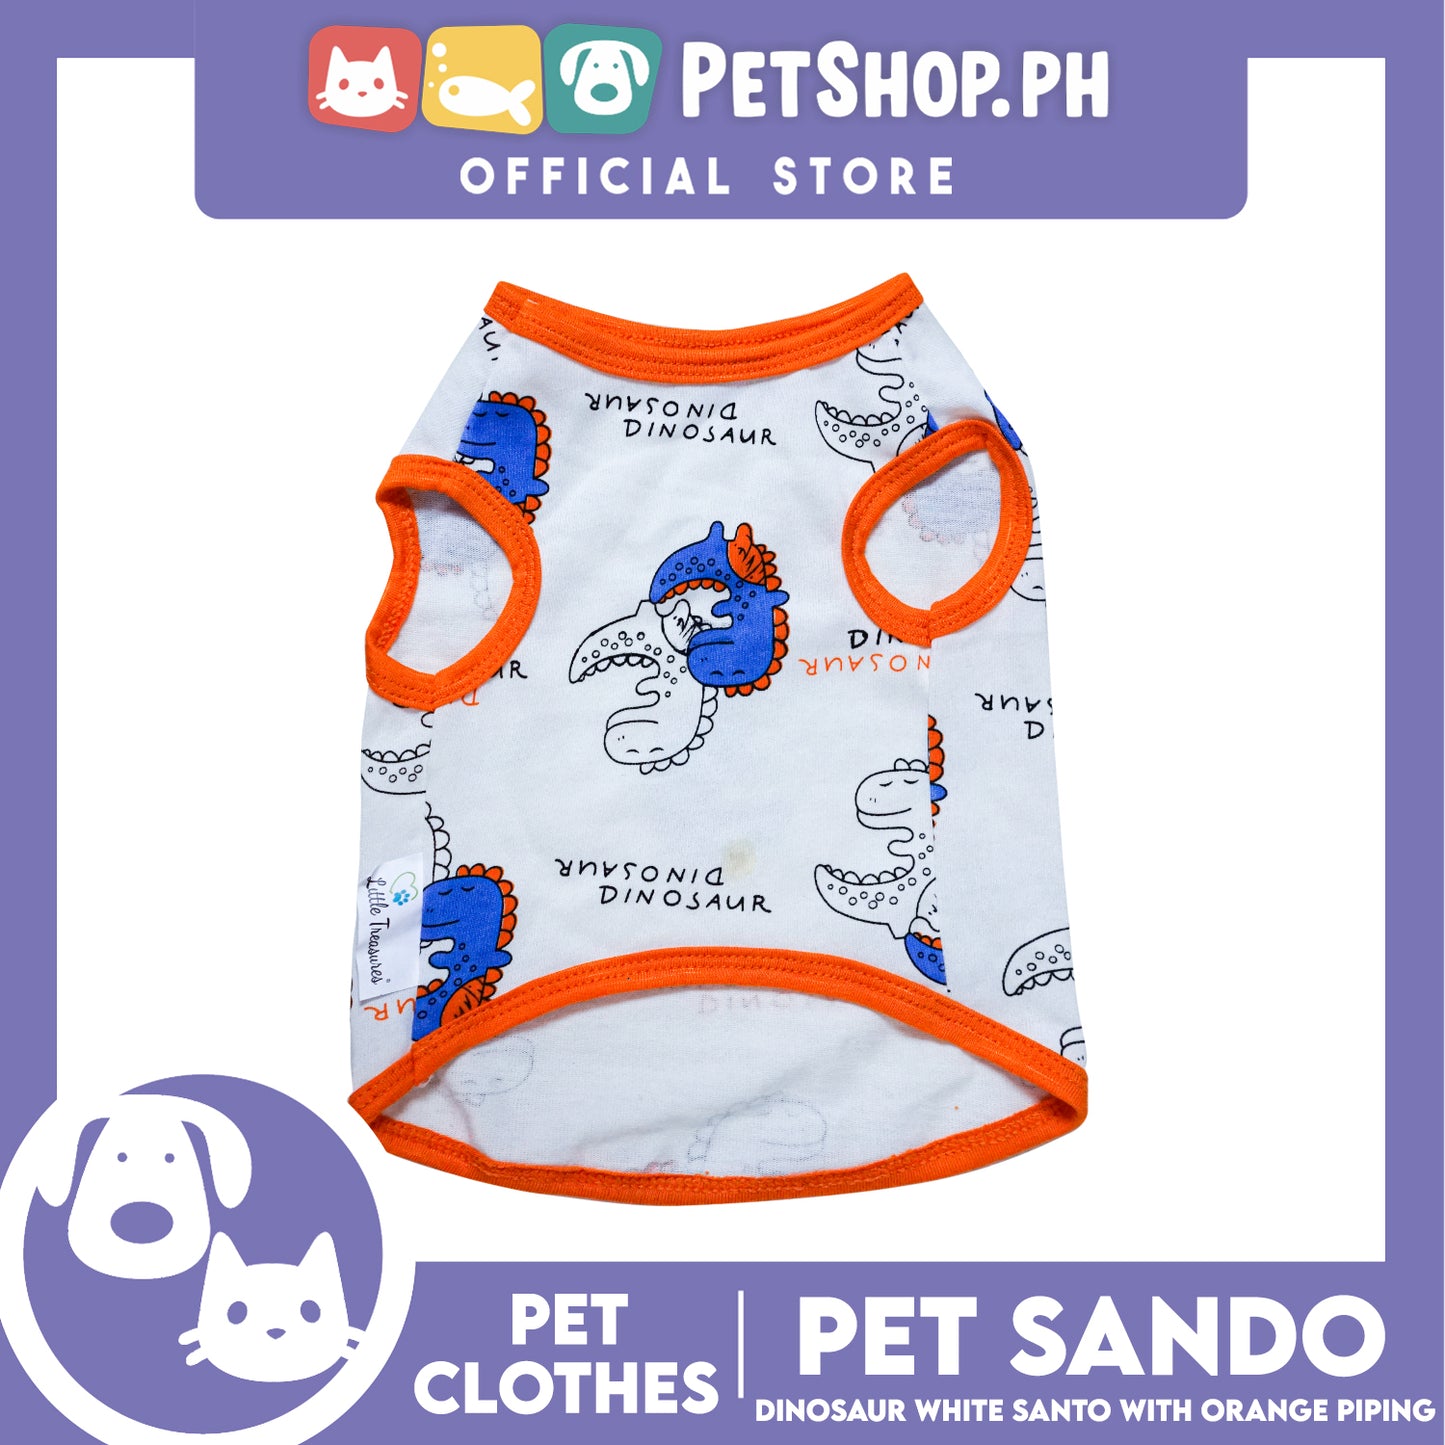 Pet Sando Dinosaur White with Orange Piping Sando (Extra Large) Perfect Fit for Dogs and Cats